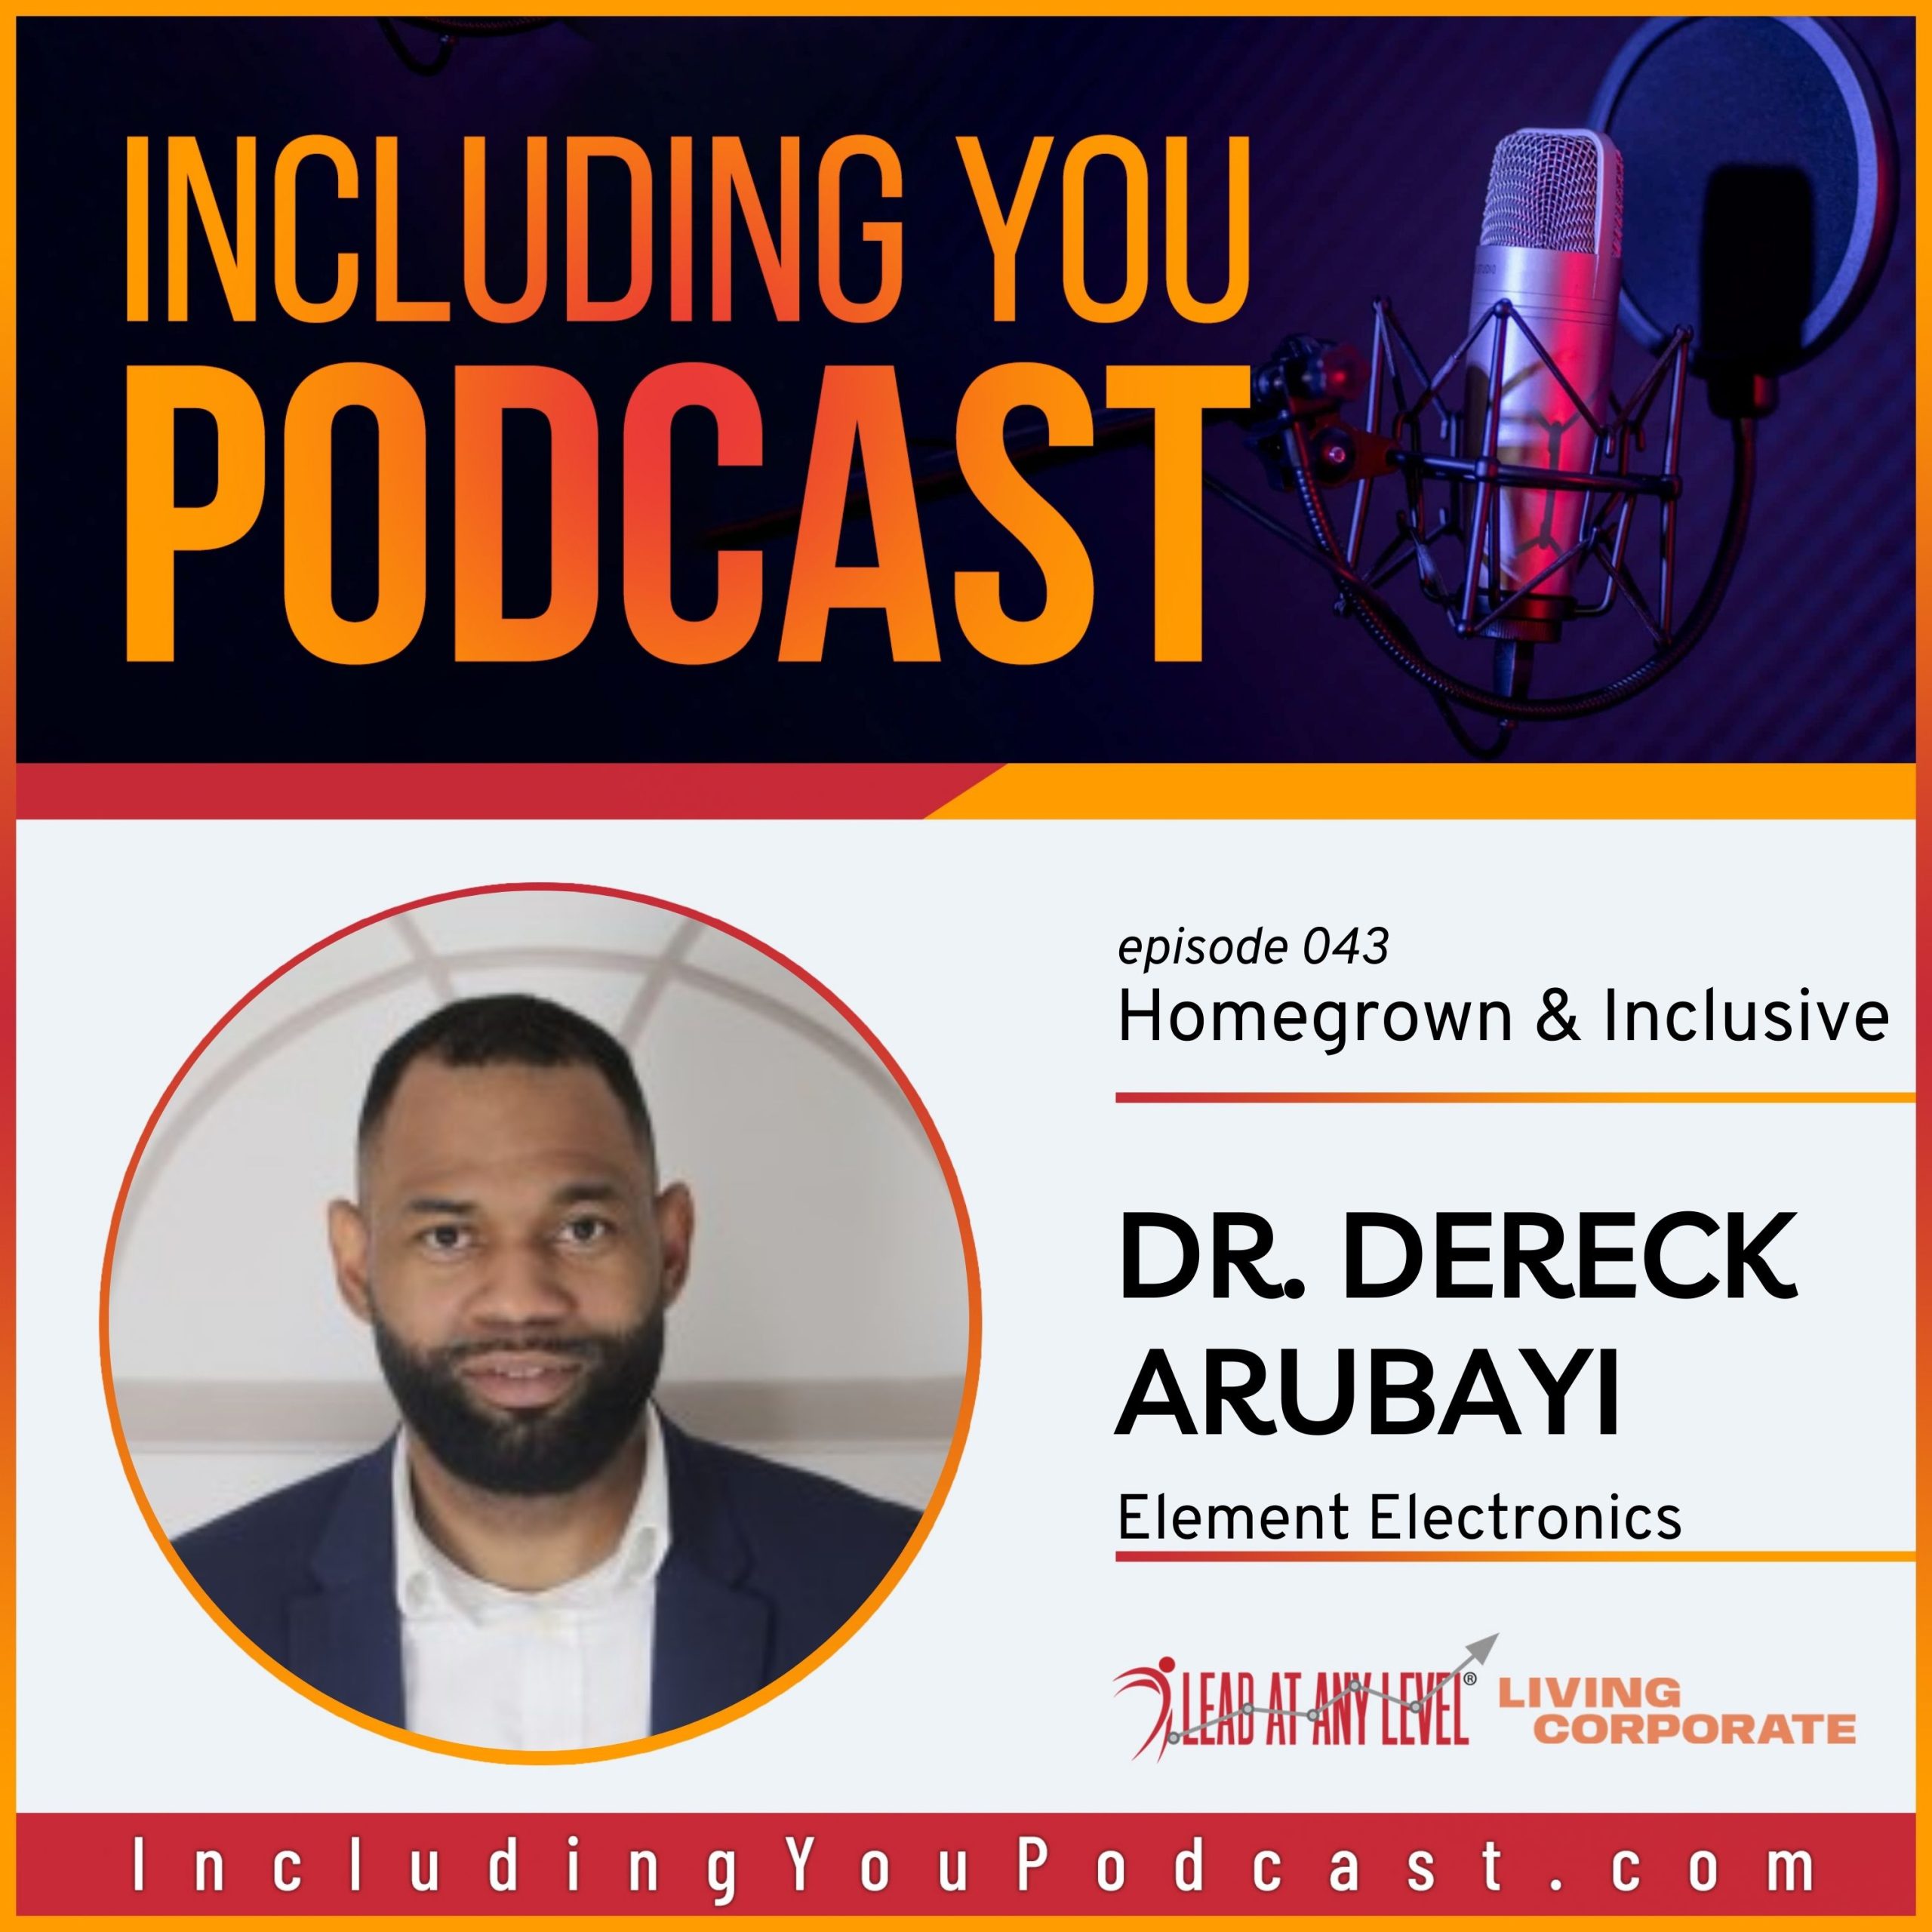 e043. Homegrown & Inclusive with Dr. Dereck Arubayi